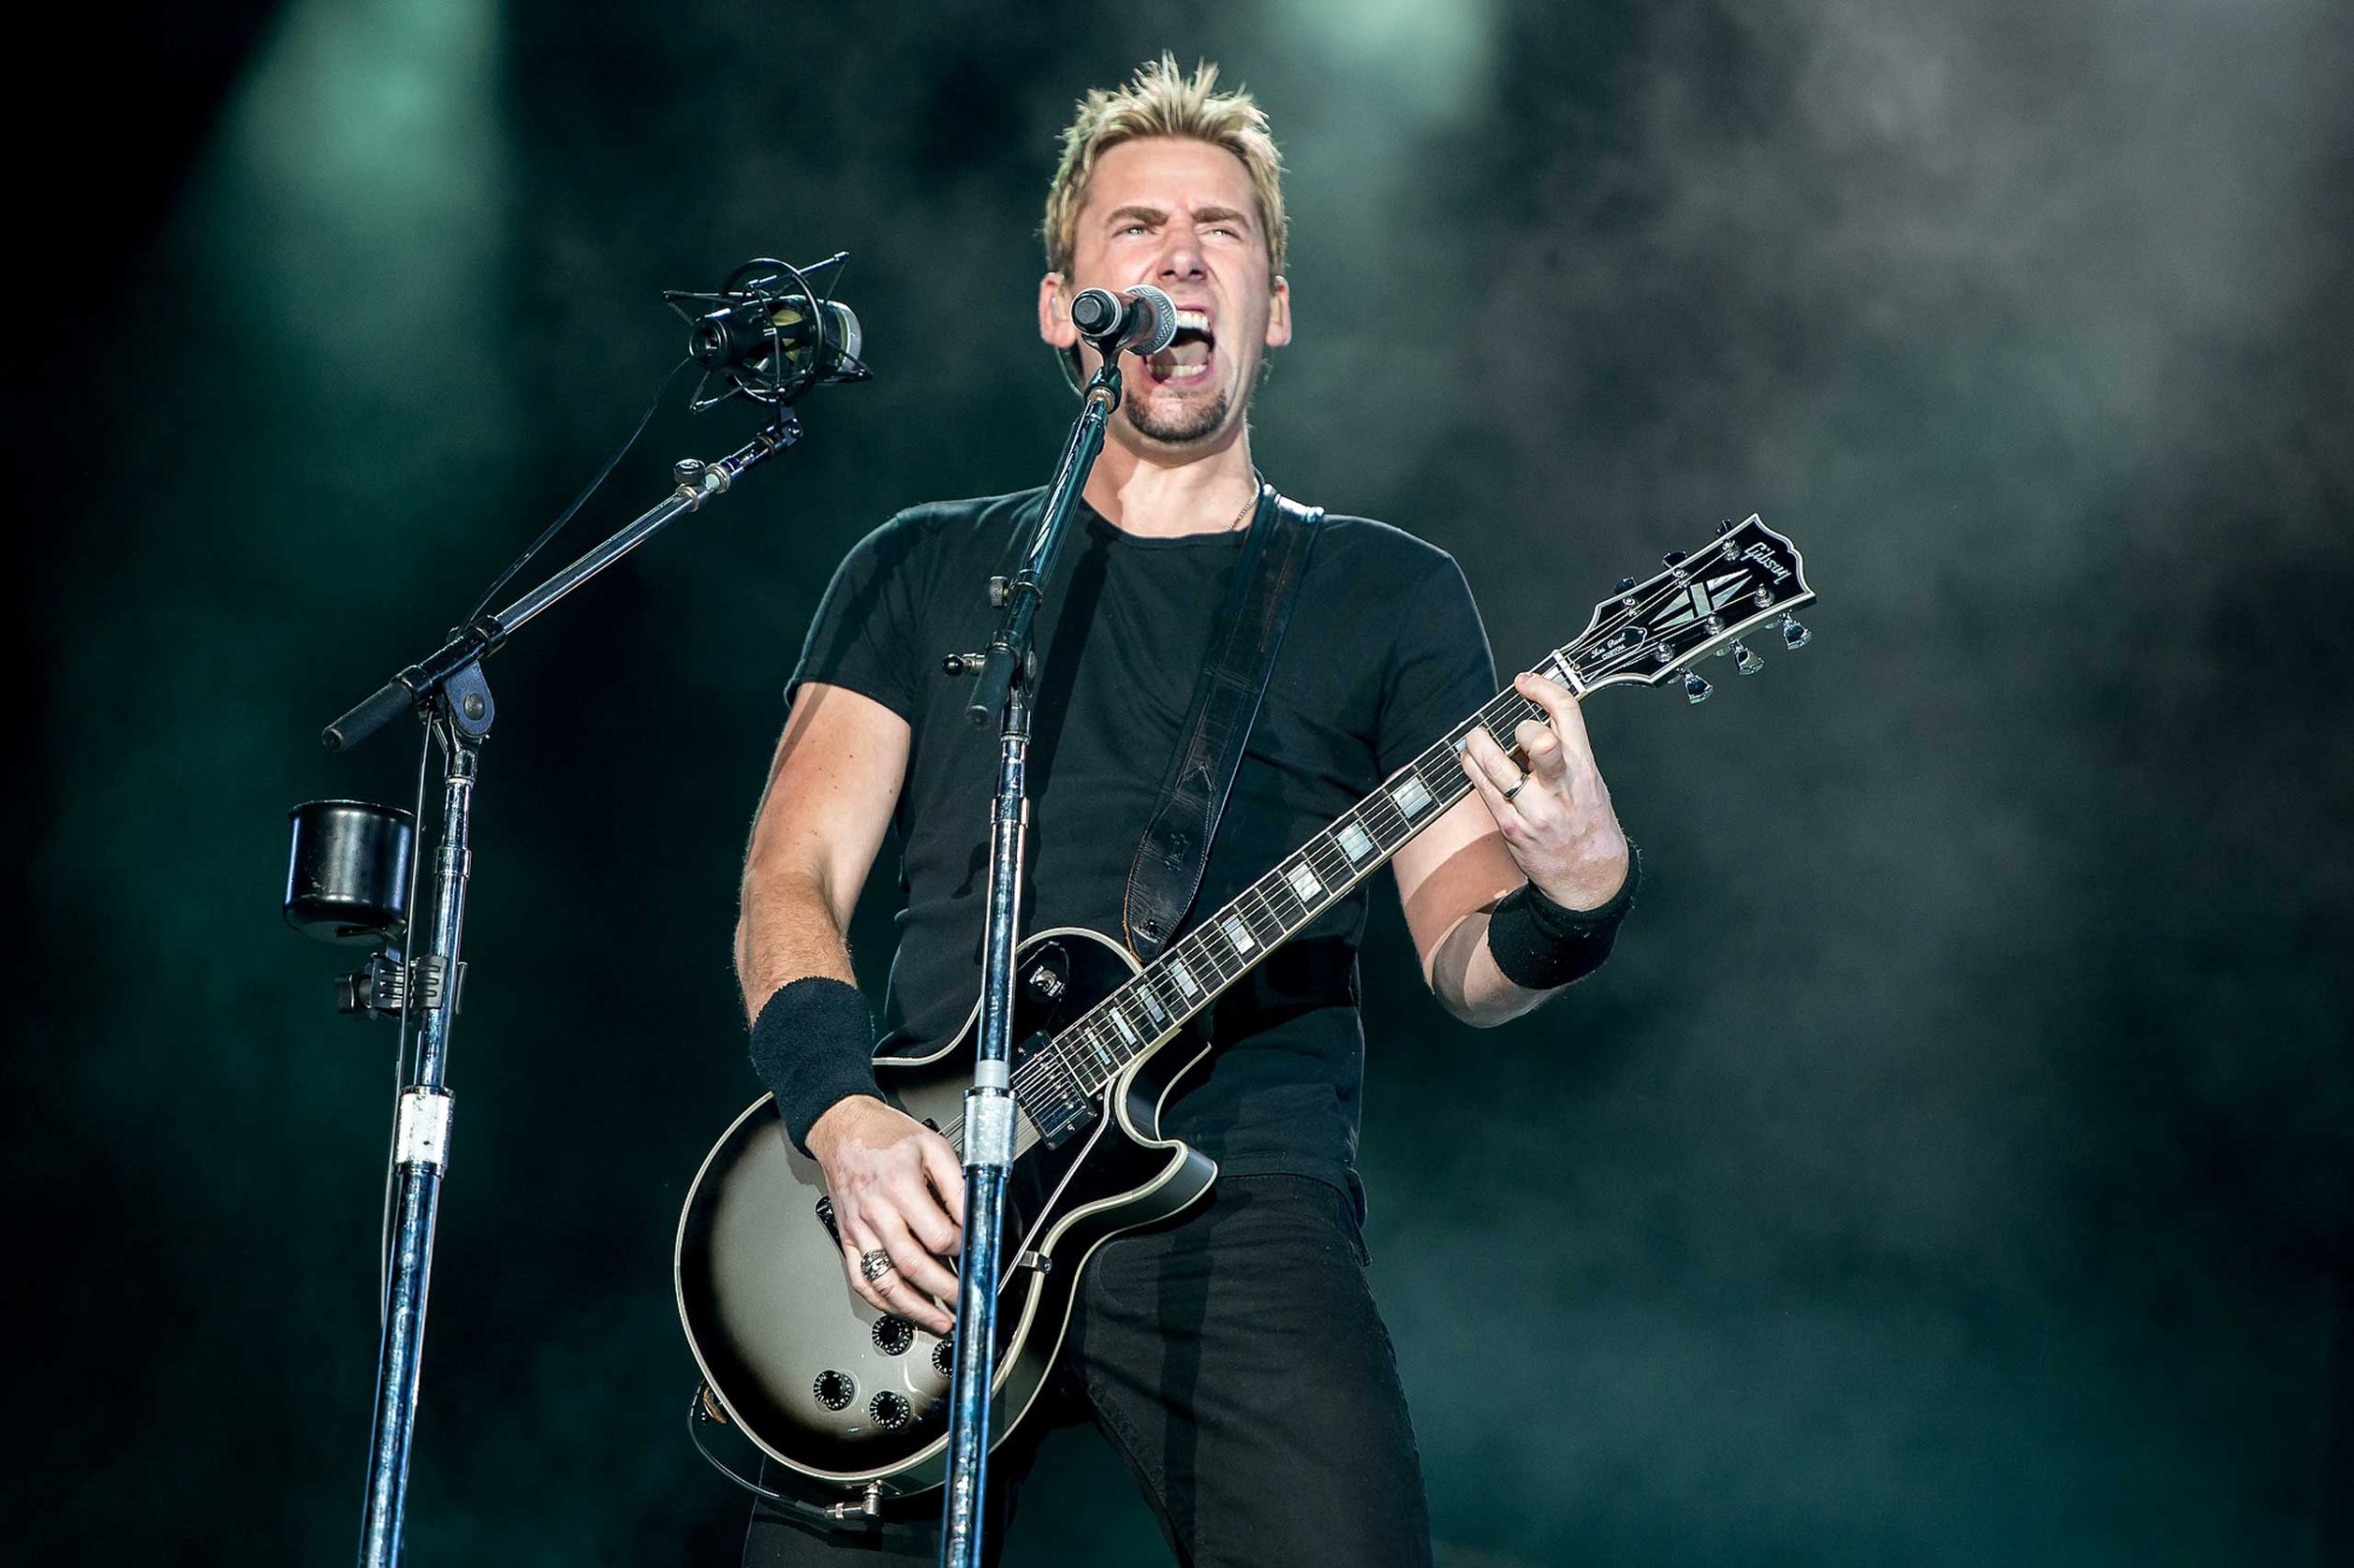 Chad Kroeger of Nickelback performs on stage during a concert in the Rock in Rio Festival in Rio de Janeiro in 2013.